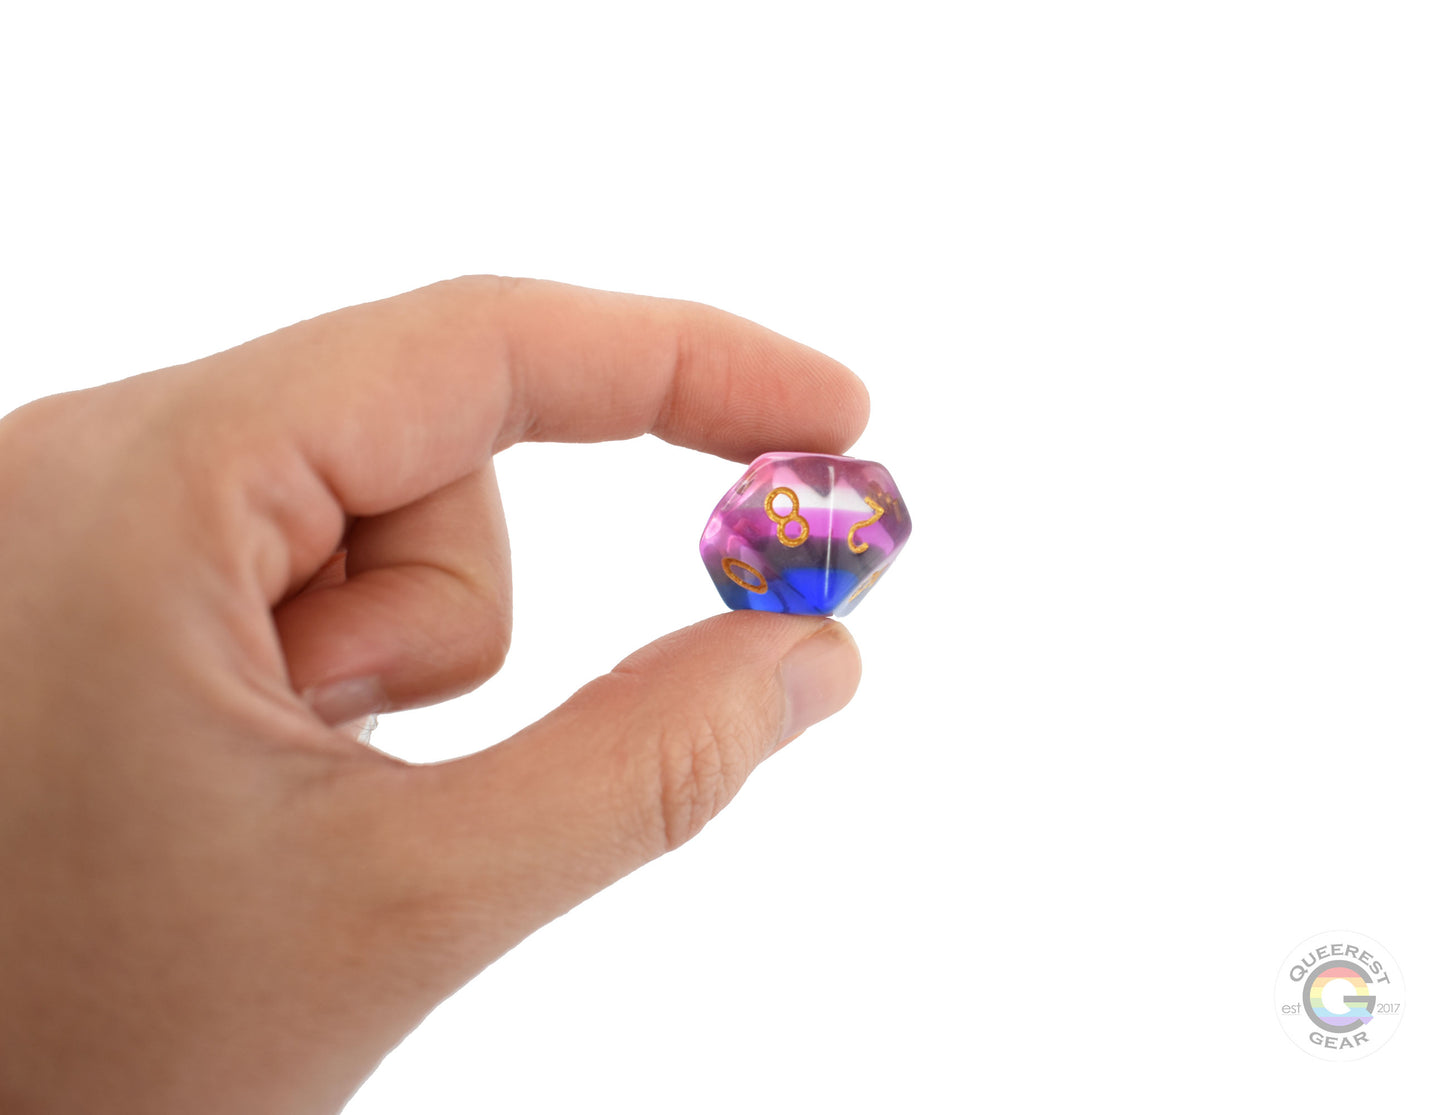 A hand holding up the genderfluid d10 to show off the color and transparency